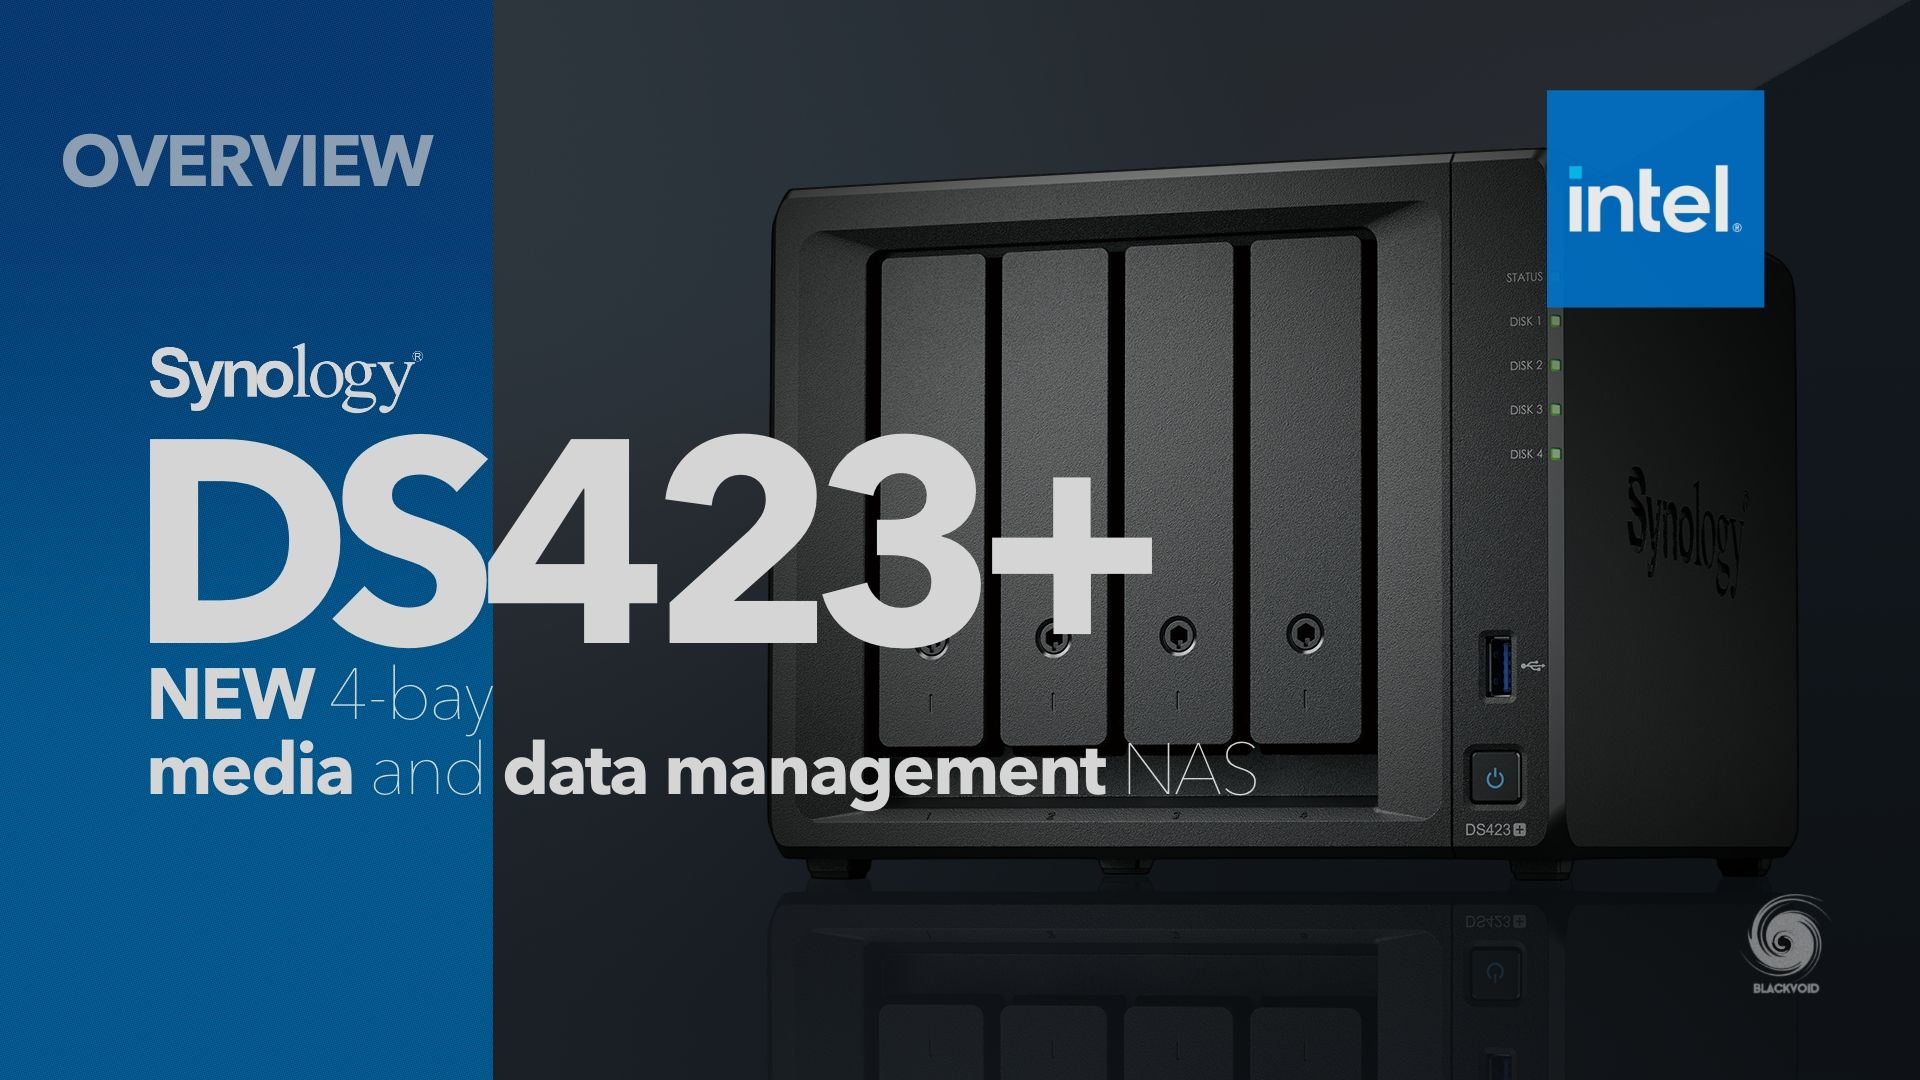 Synology releases first J-series NAS with support for Btrfs file system,  the DS223j - BWOne